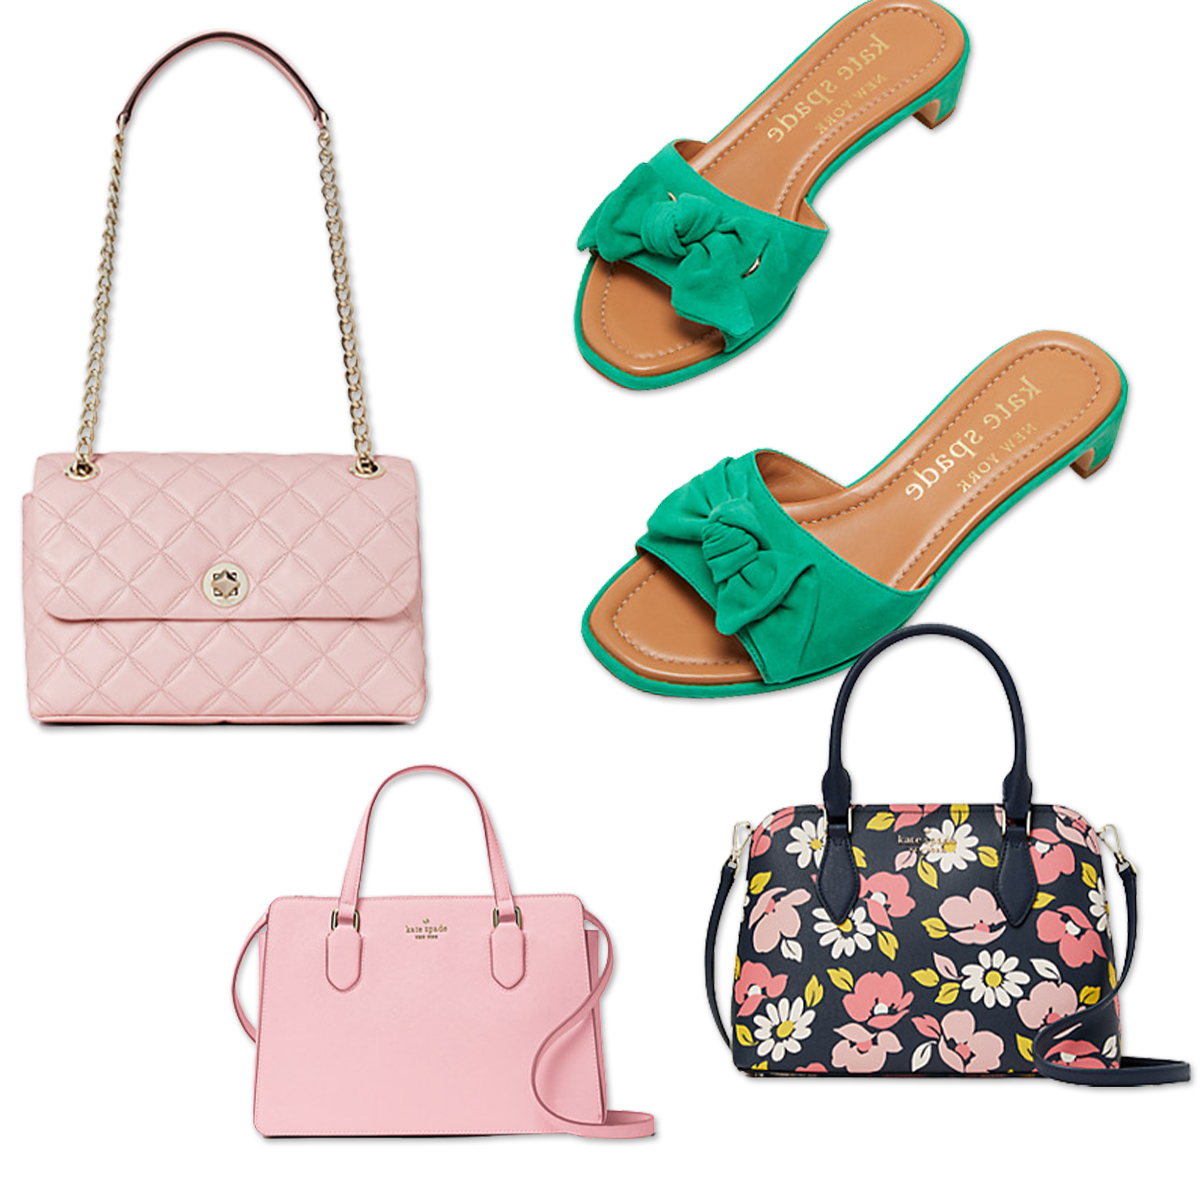 Kate Spade bag sale: 12 dreamy styles to add to your basket ASAP